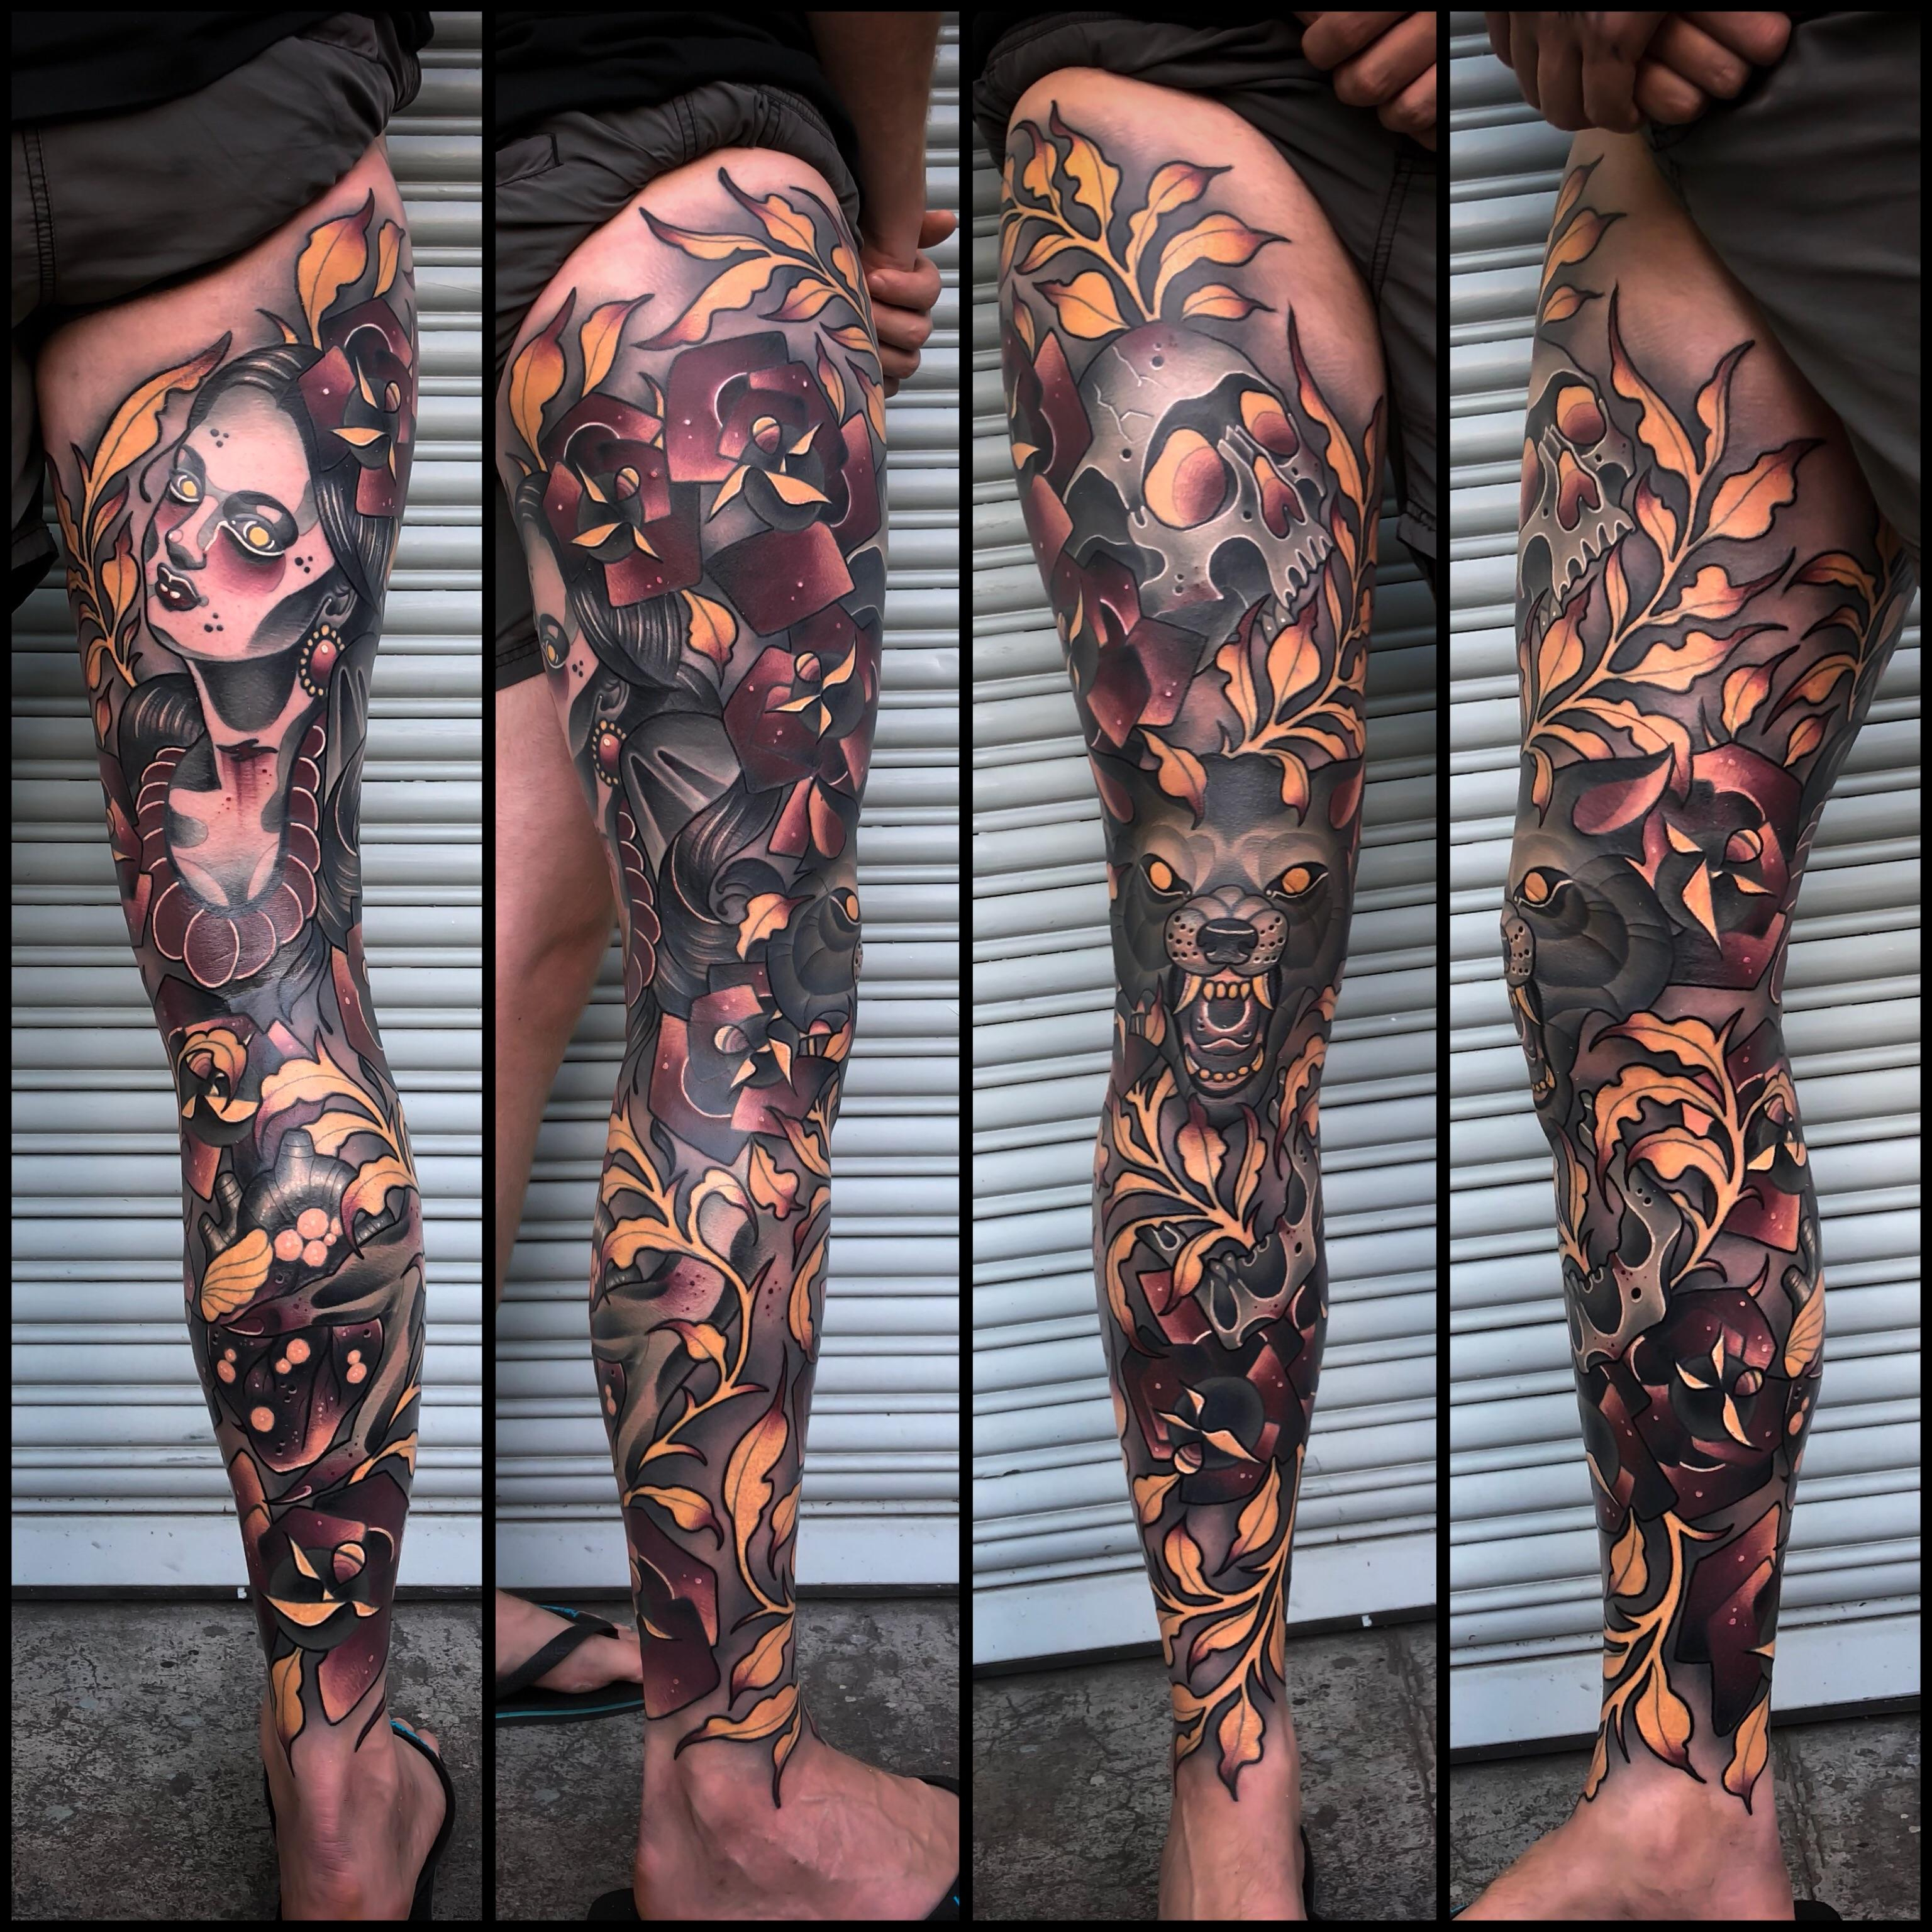 My Leg Sleeve Matt Curzon Out Of Empire In Prahran Melbourne within dimensions 3072 X 3072